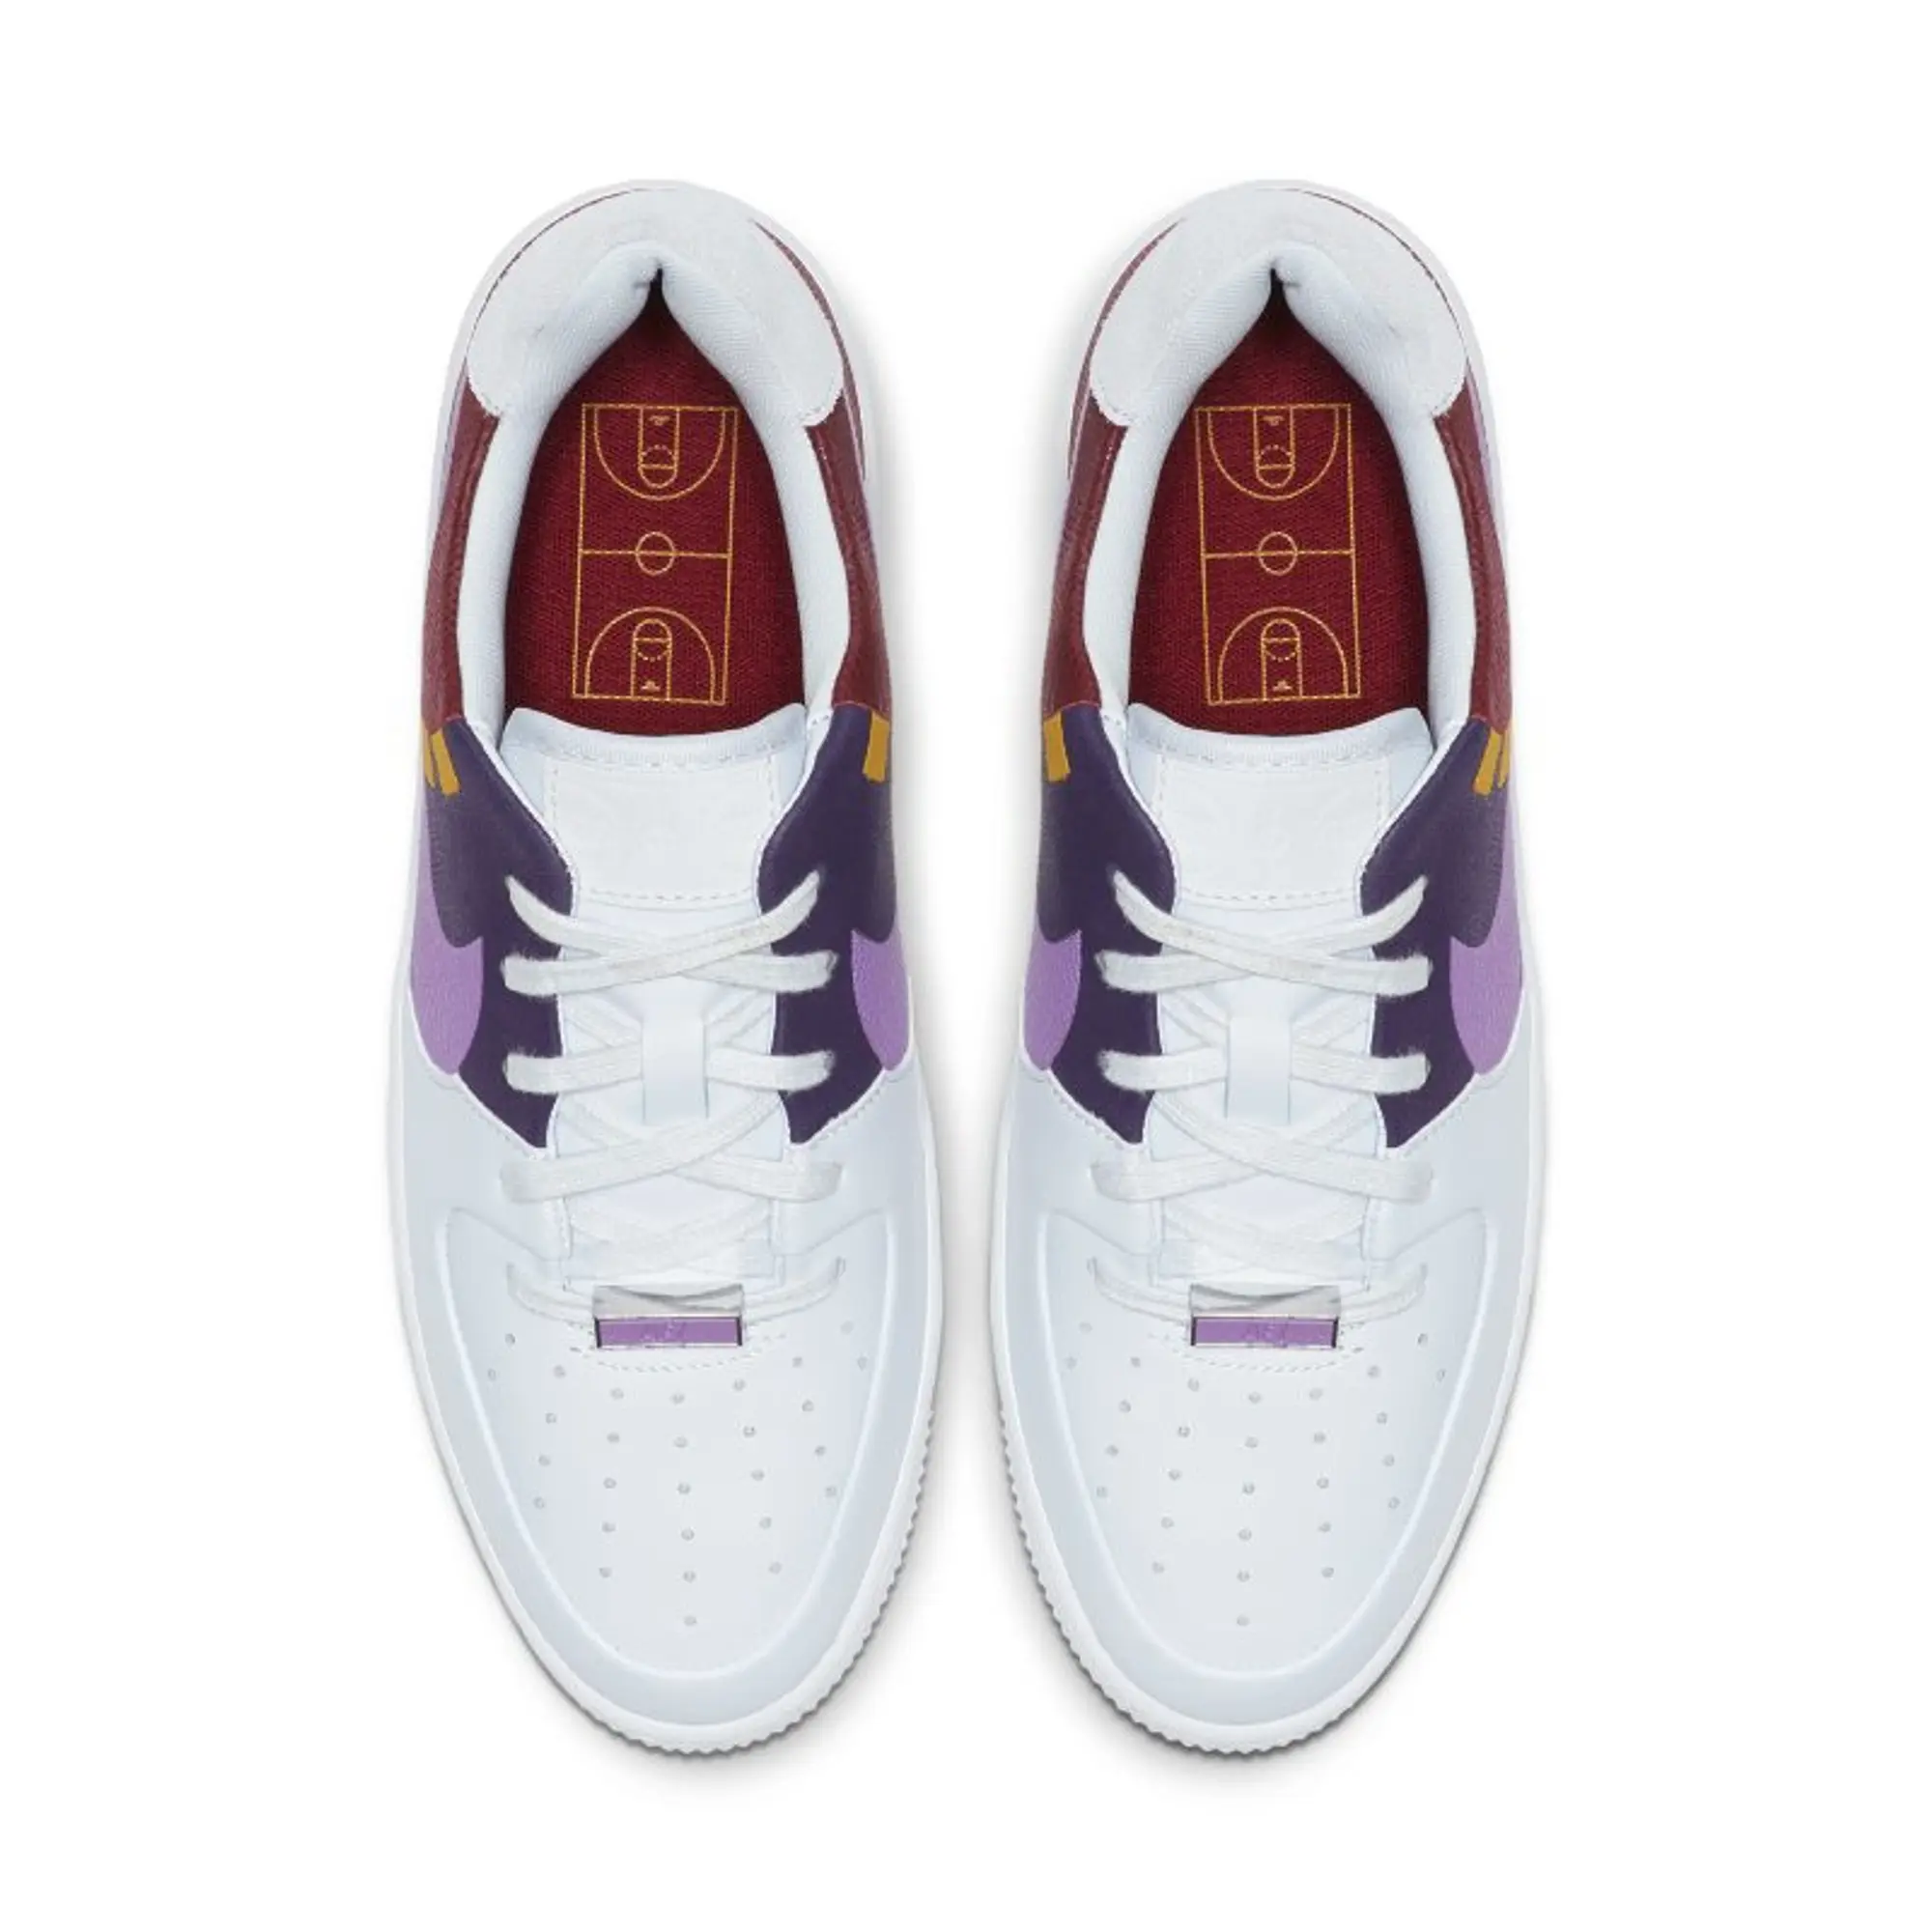 Nike Air Force 1 Sage Low LX Womens Grey Dark Orchid Shoes